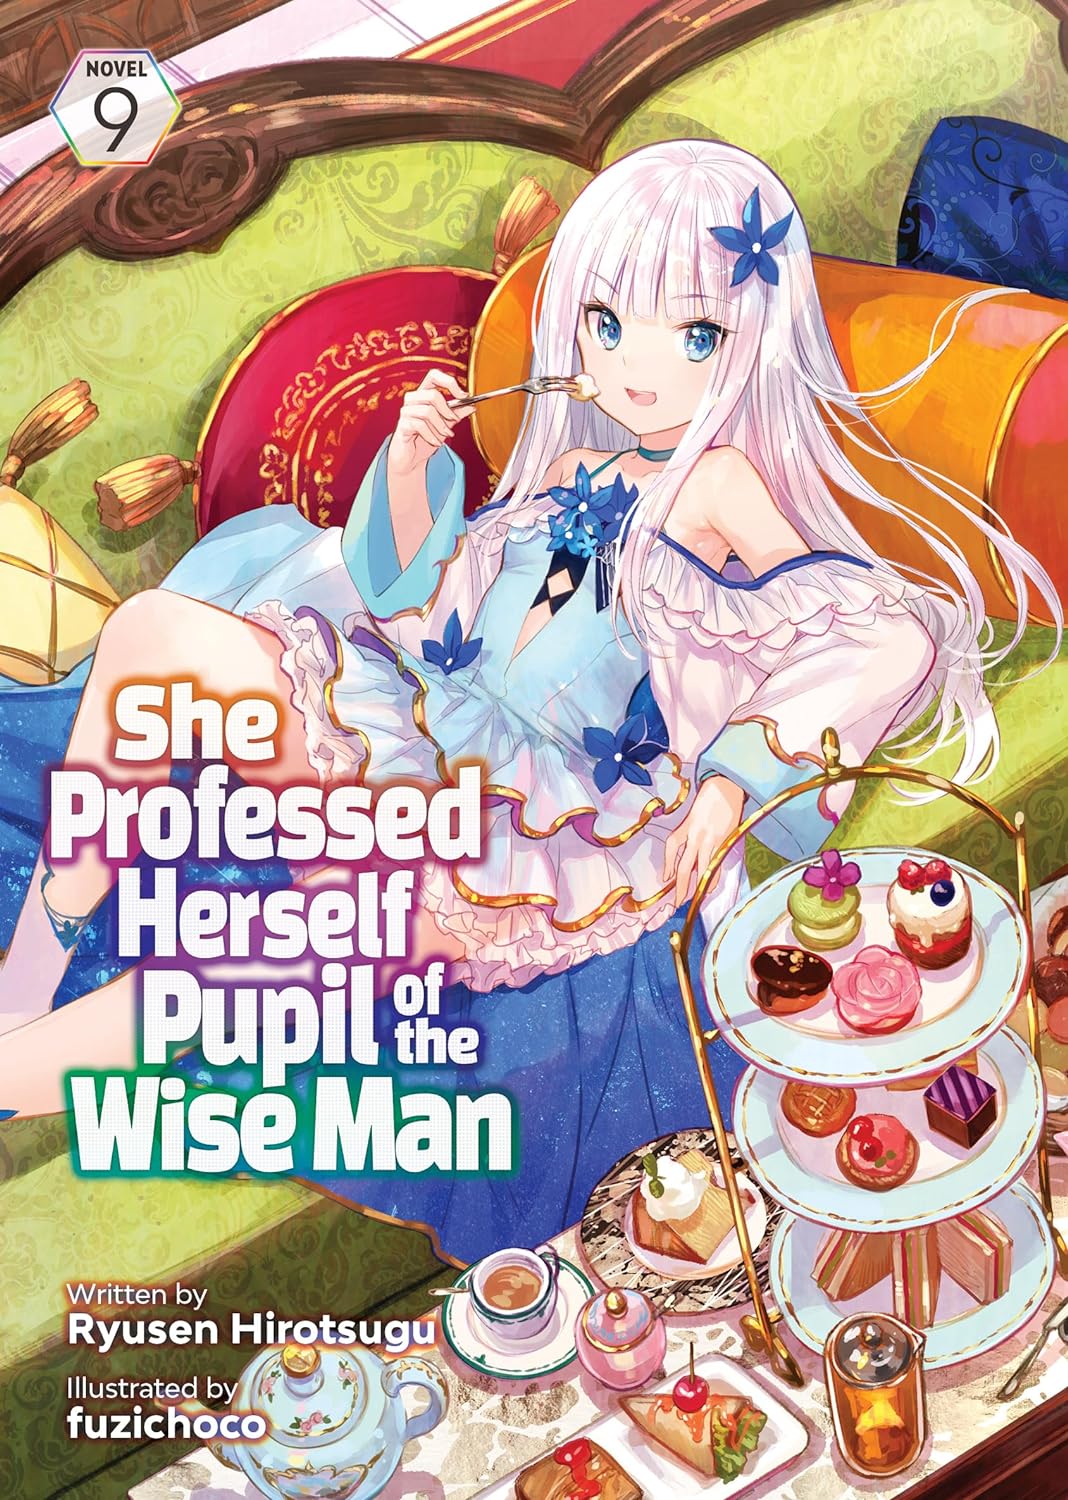 She Professed Herself Pupil of the Wise Man (Light Novel) Vol. 09